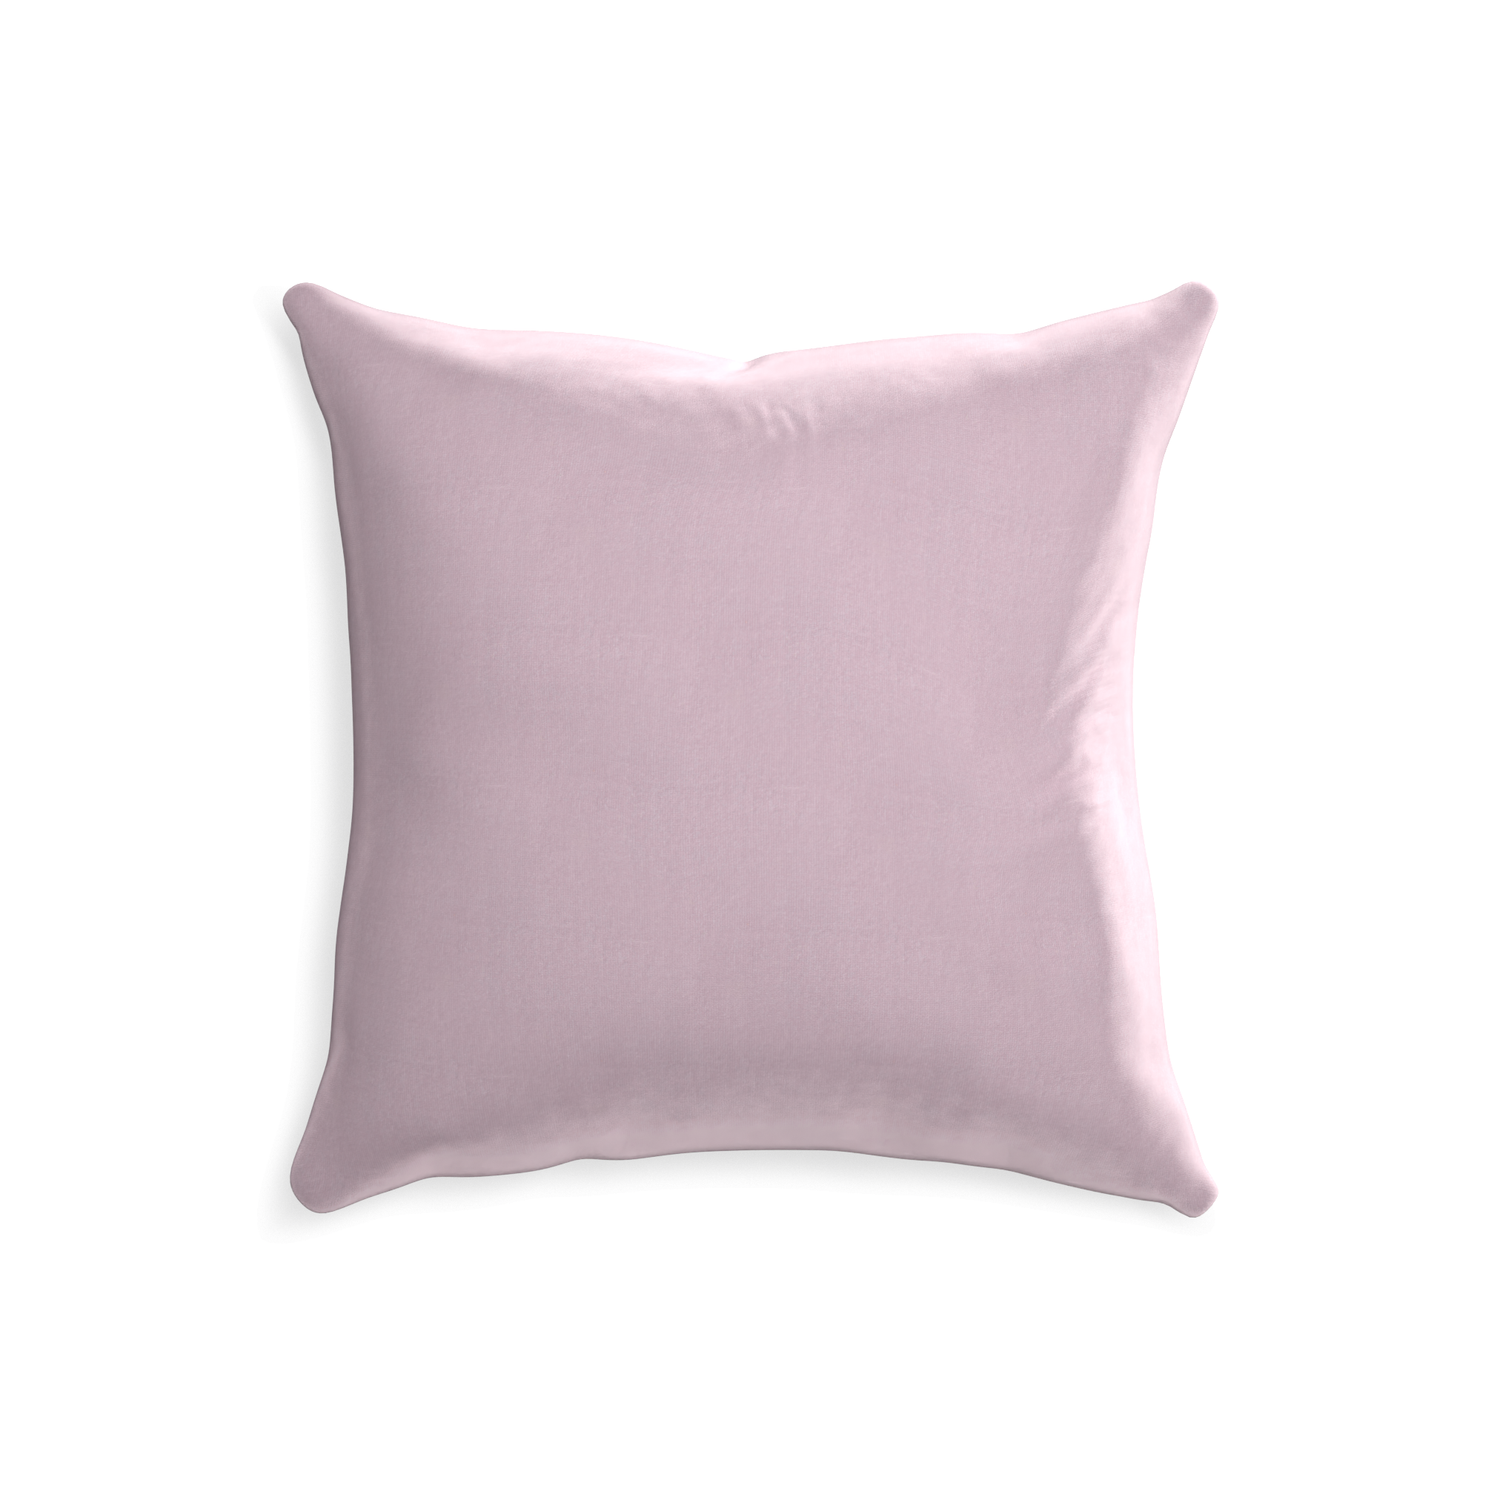 20-square lilac velvet custom lilacpillow with none on white background